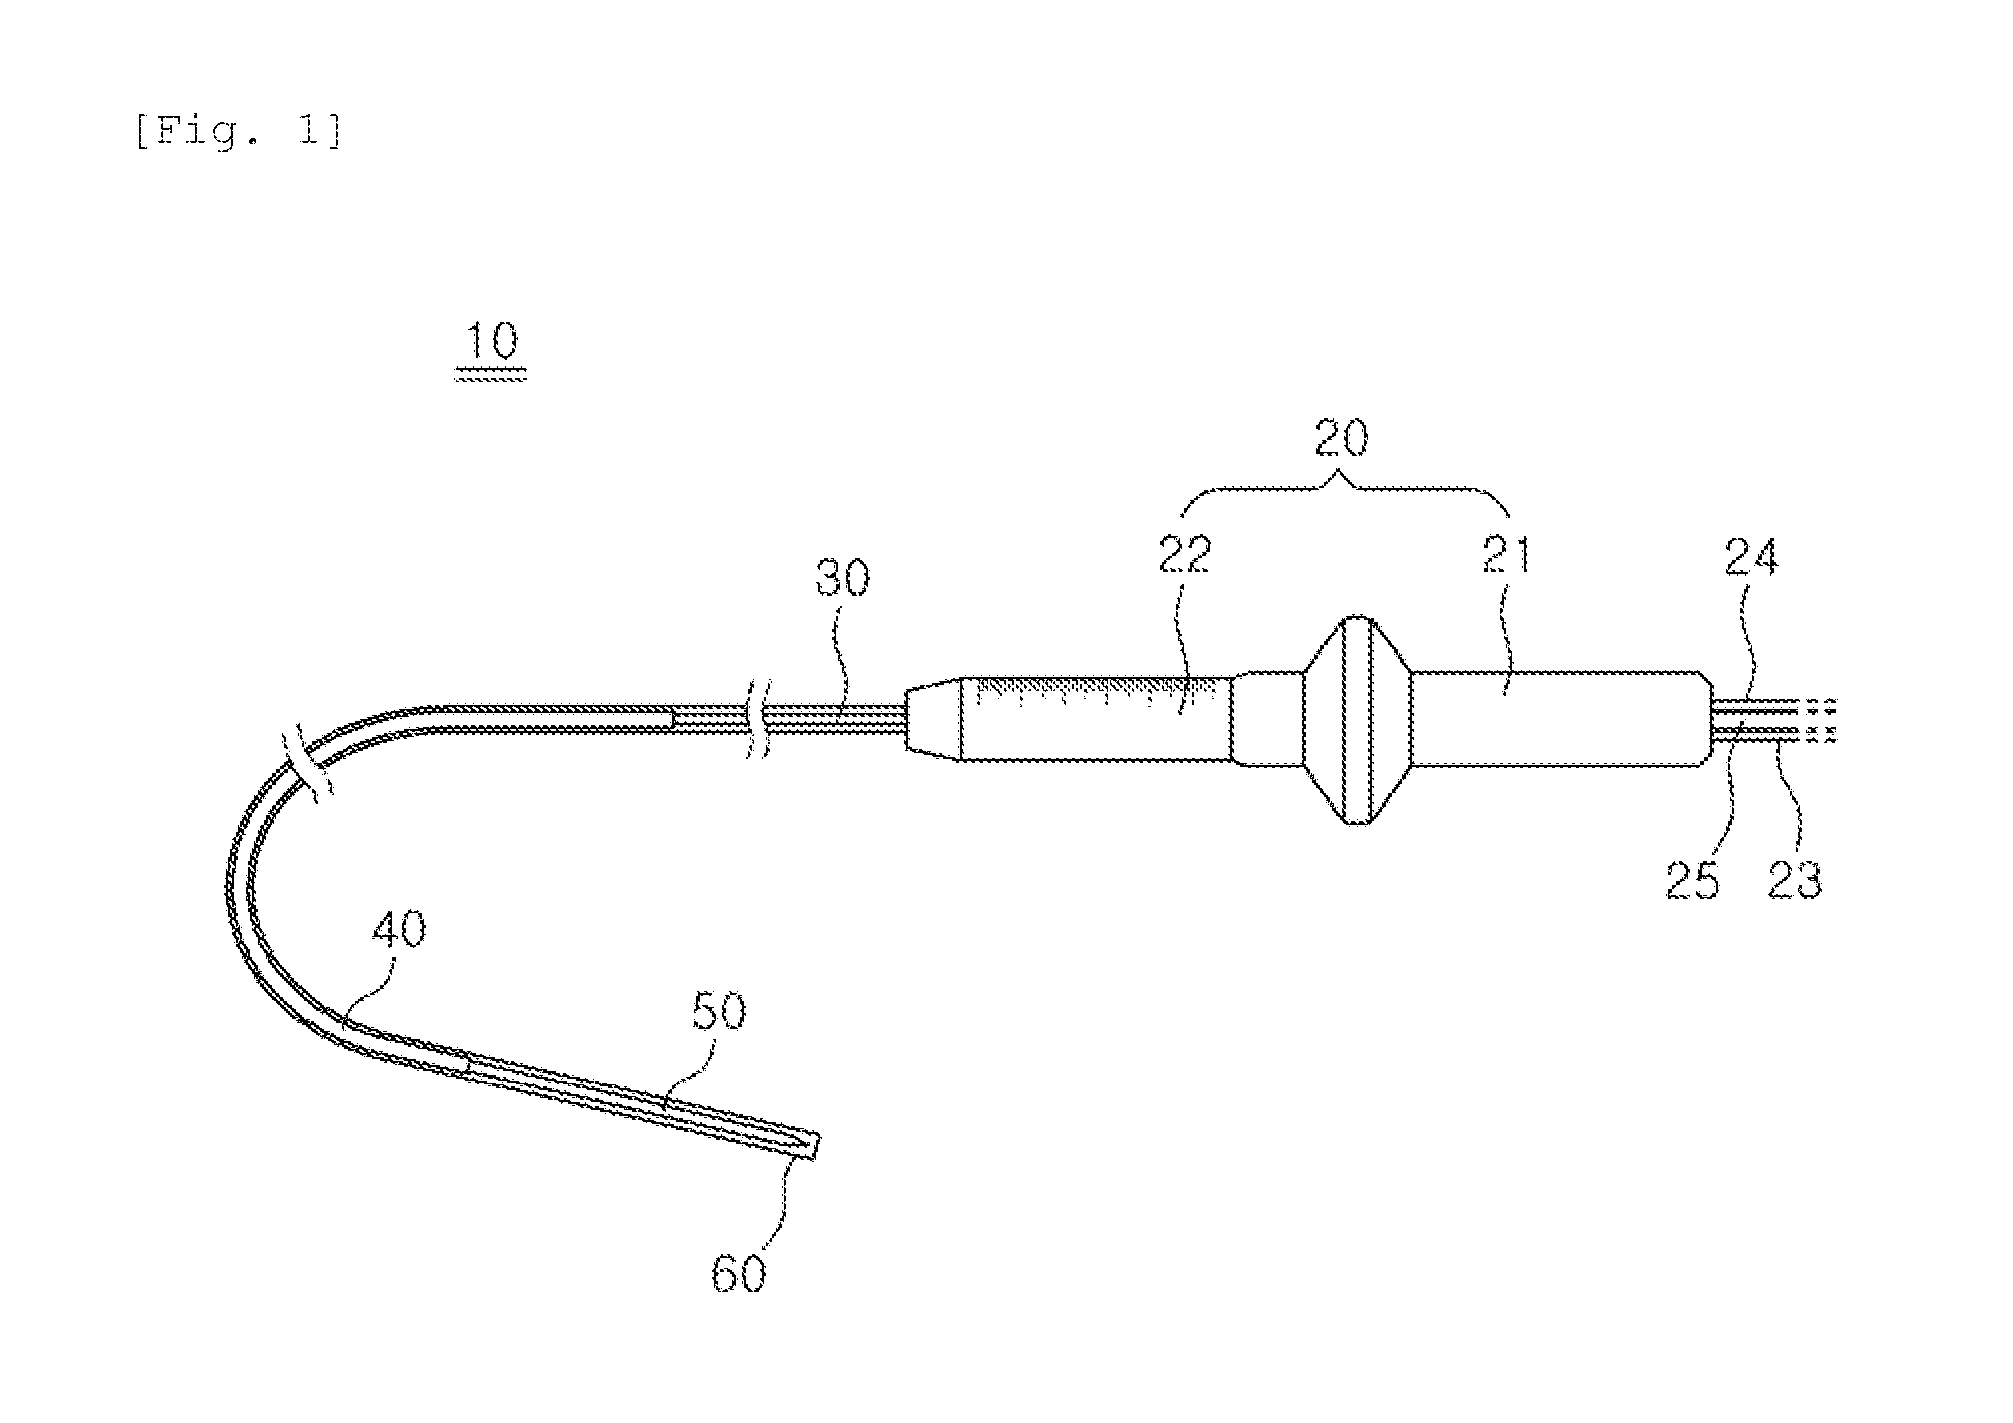 High-frequency heat therapy electrode device equipped with flexible tube